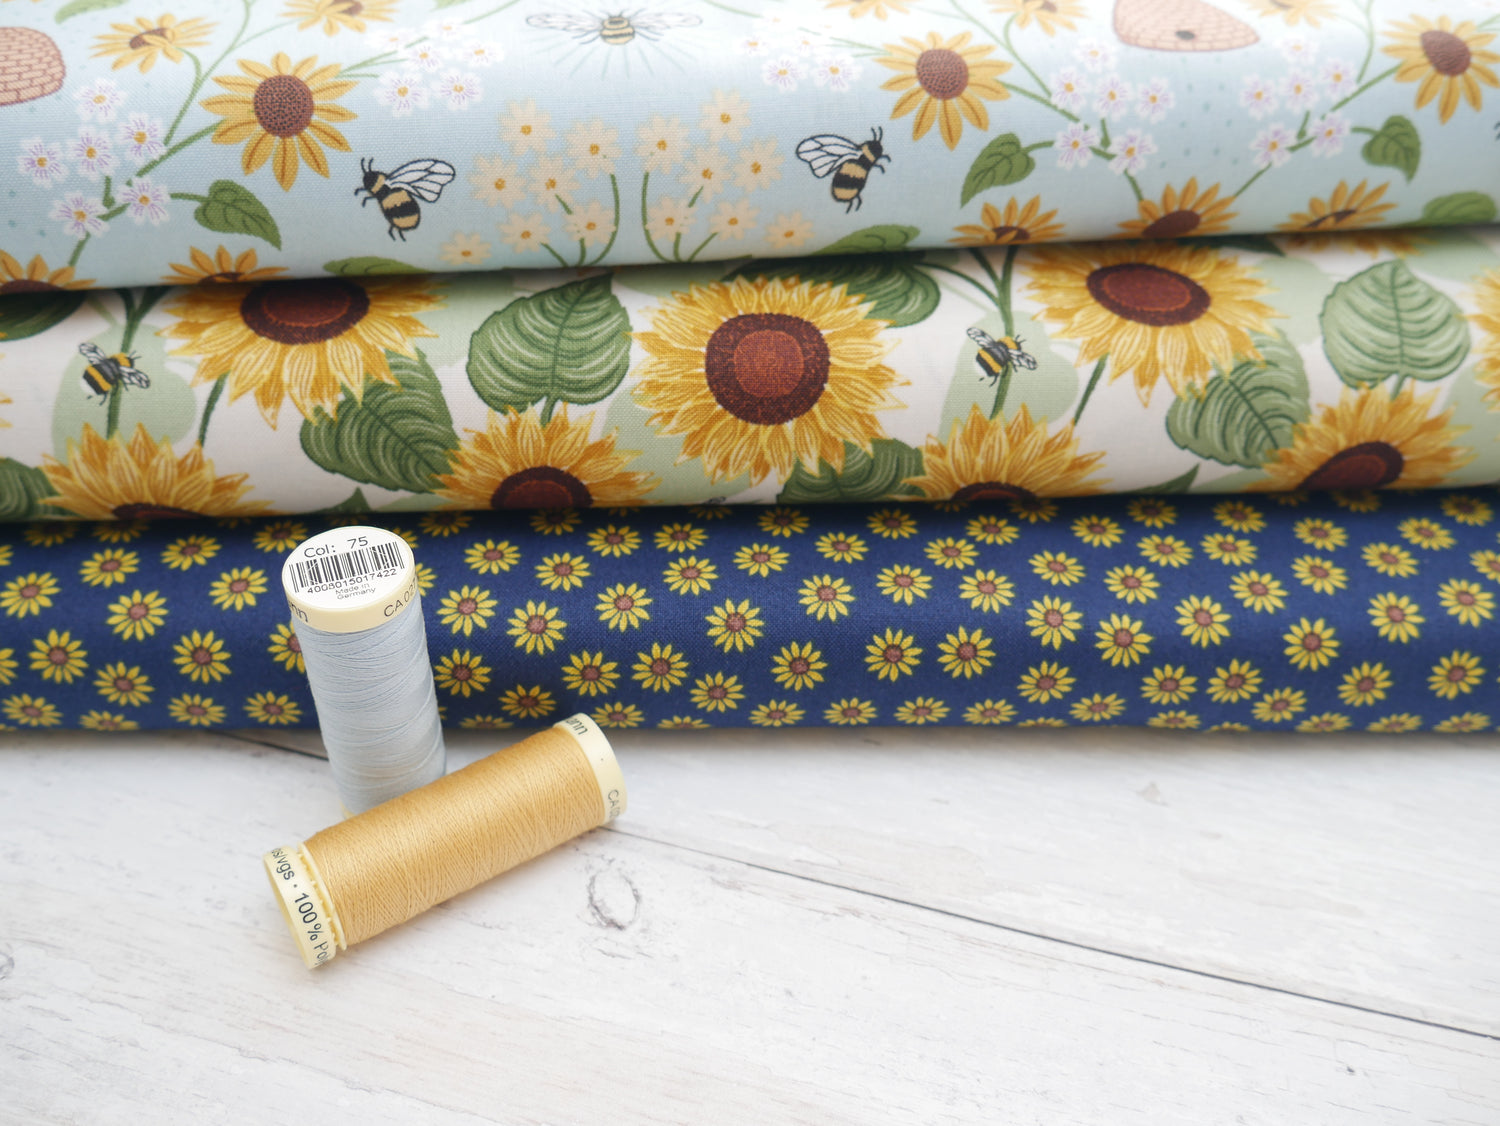 Bee Hive on Pale Blue by Lewis and Irene , £14.50 p/m-Cotton-Flying Bobbins Haberdashery